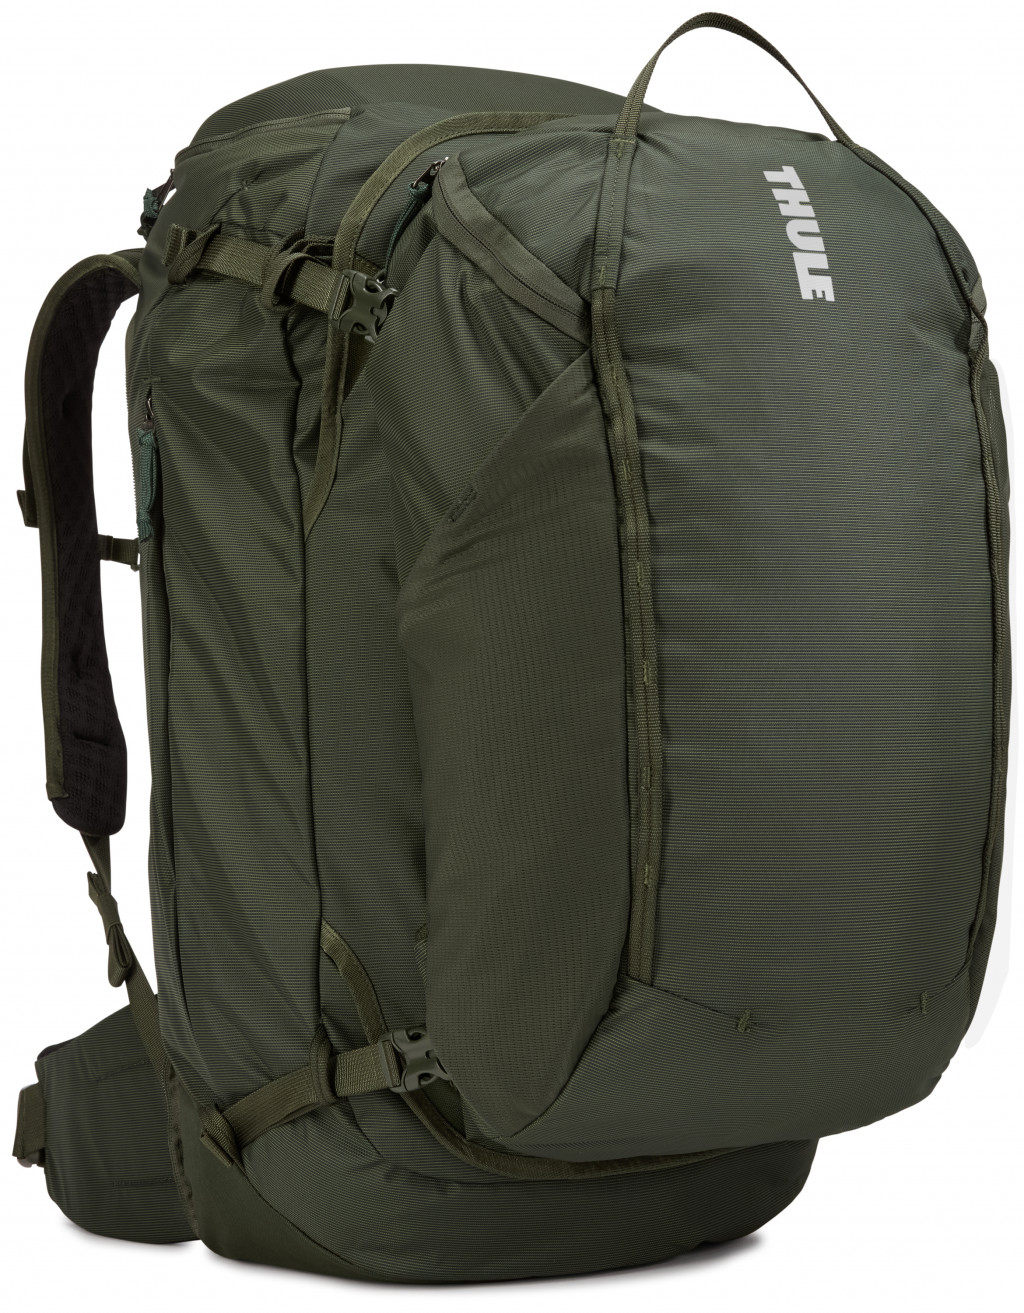 Thule | Fits up to size  " | 70L Backpacking pack | TLPM-170 Landmark | Backpack | Dark Forest | "